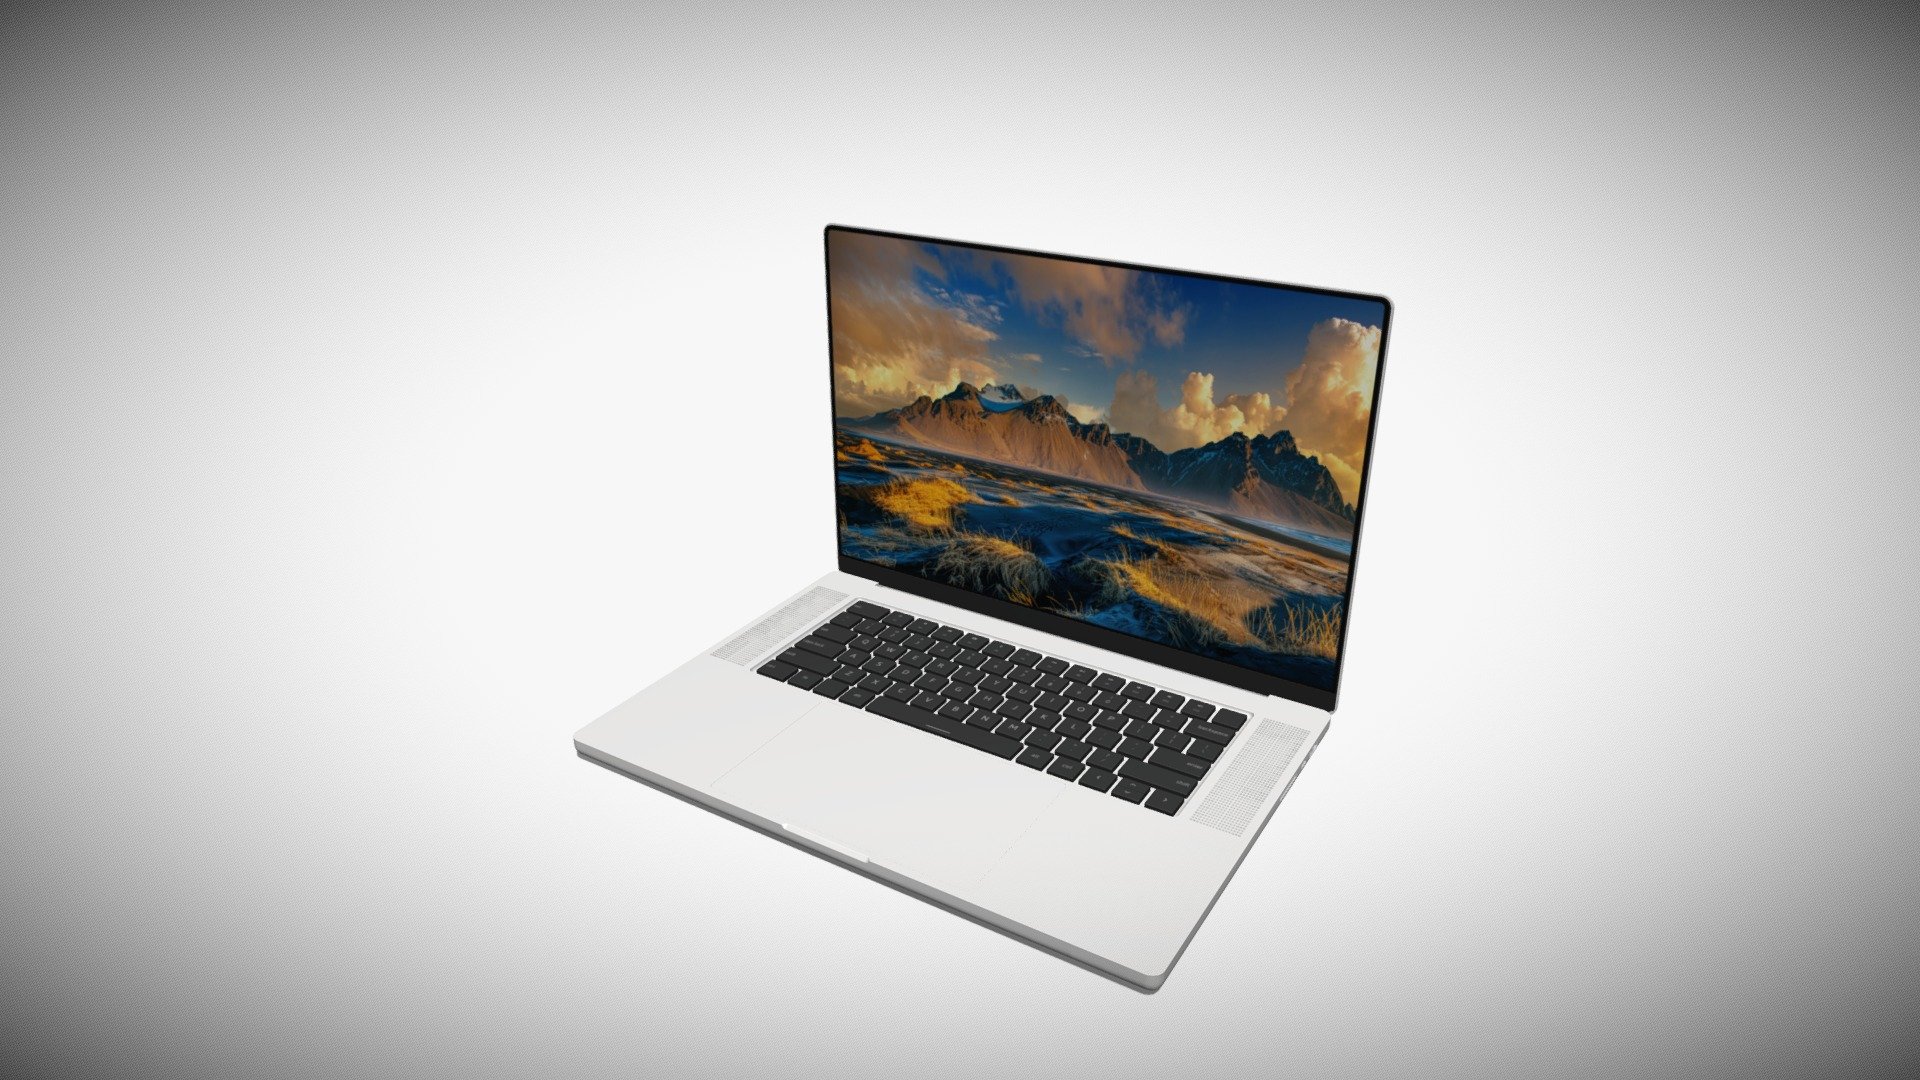 Detailed model of a white laptop, modeled in Cinema 4D.The model was created using approximate real world dimensions.

The model has 51,279 polys and 52,613 vertices.

An additional file has been provided containing the original Cinema 4D project files with both standard and v-ray materials, textures and other 3d export files such as 3ds, fbx and obj 3d model